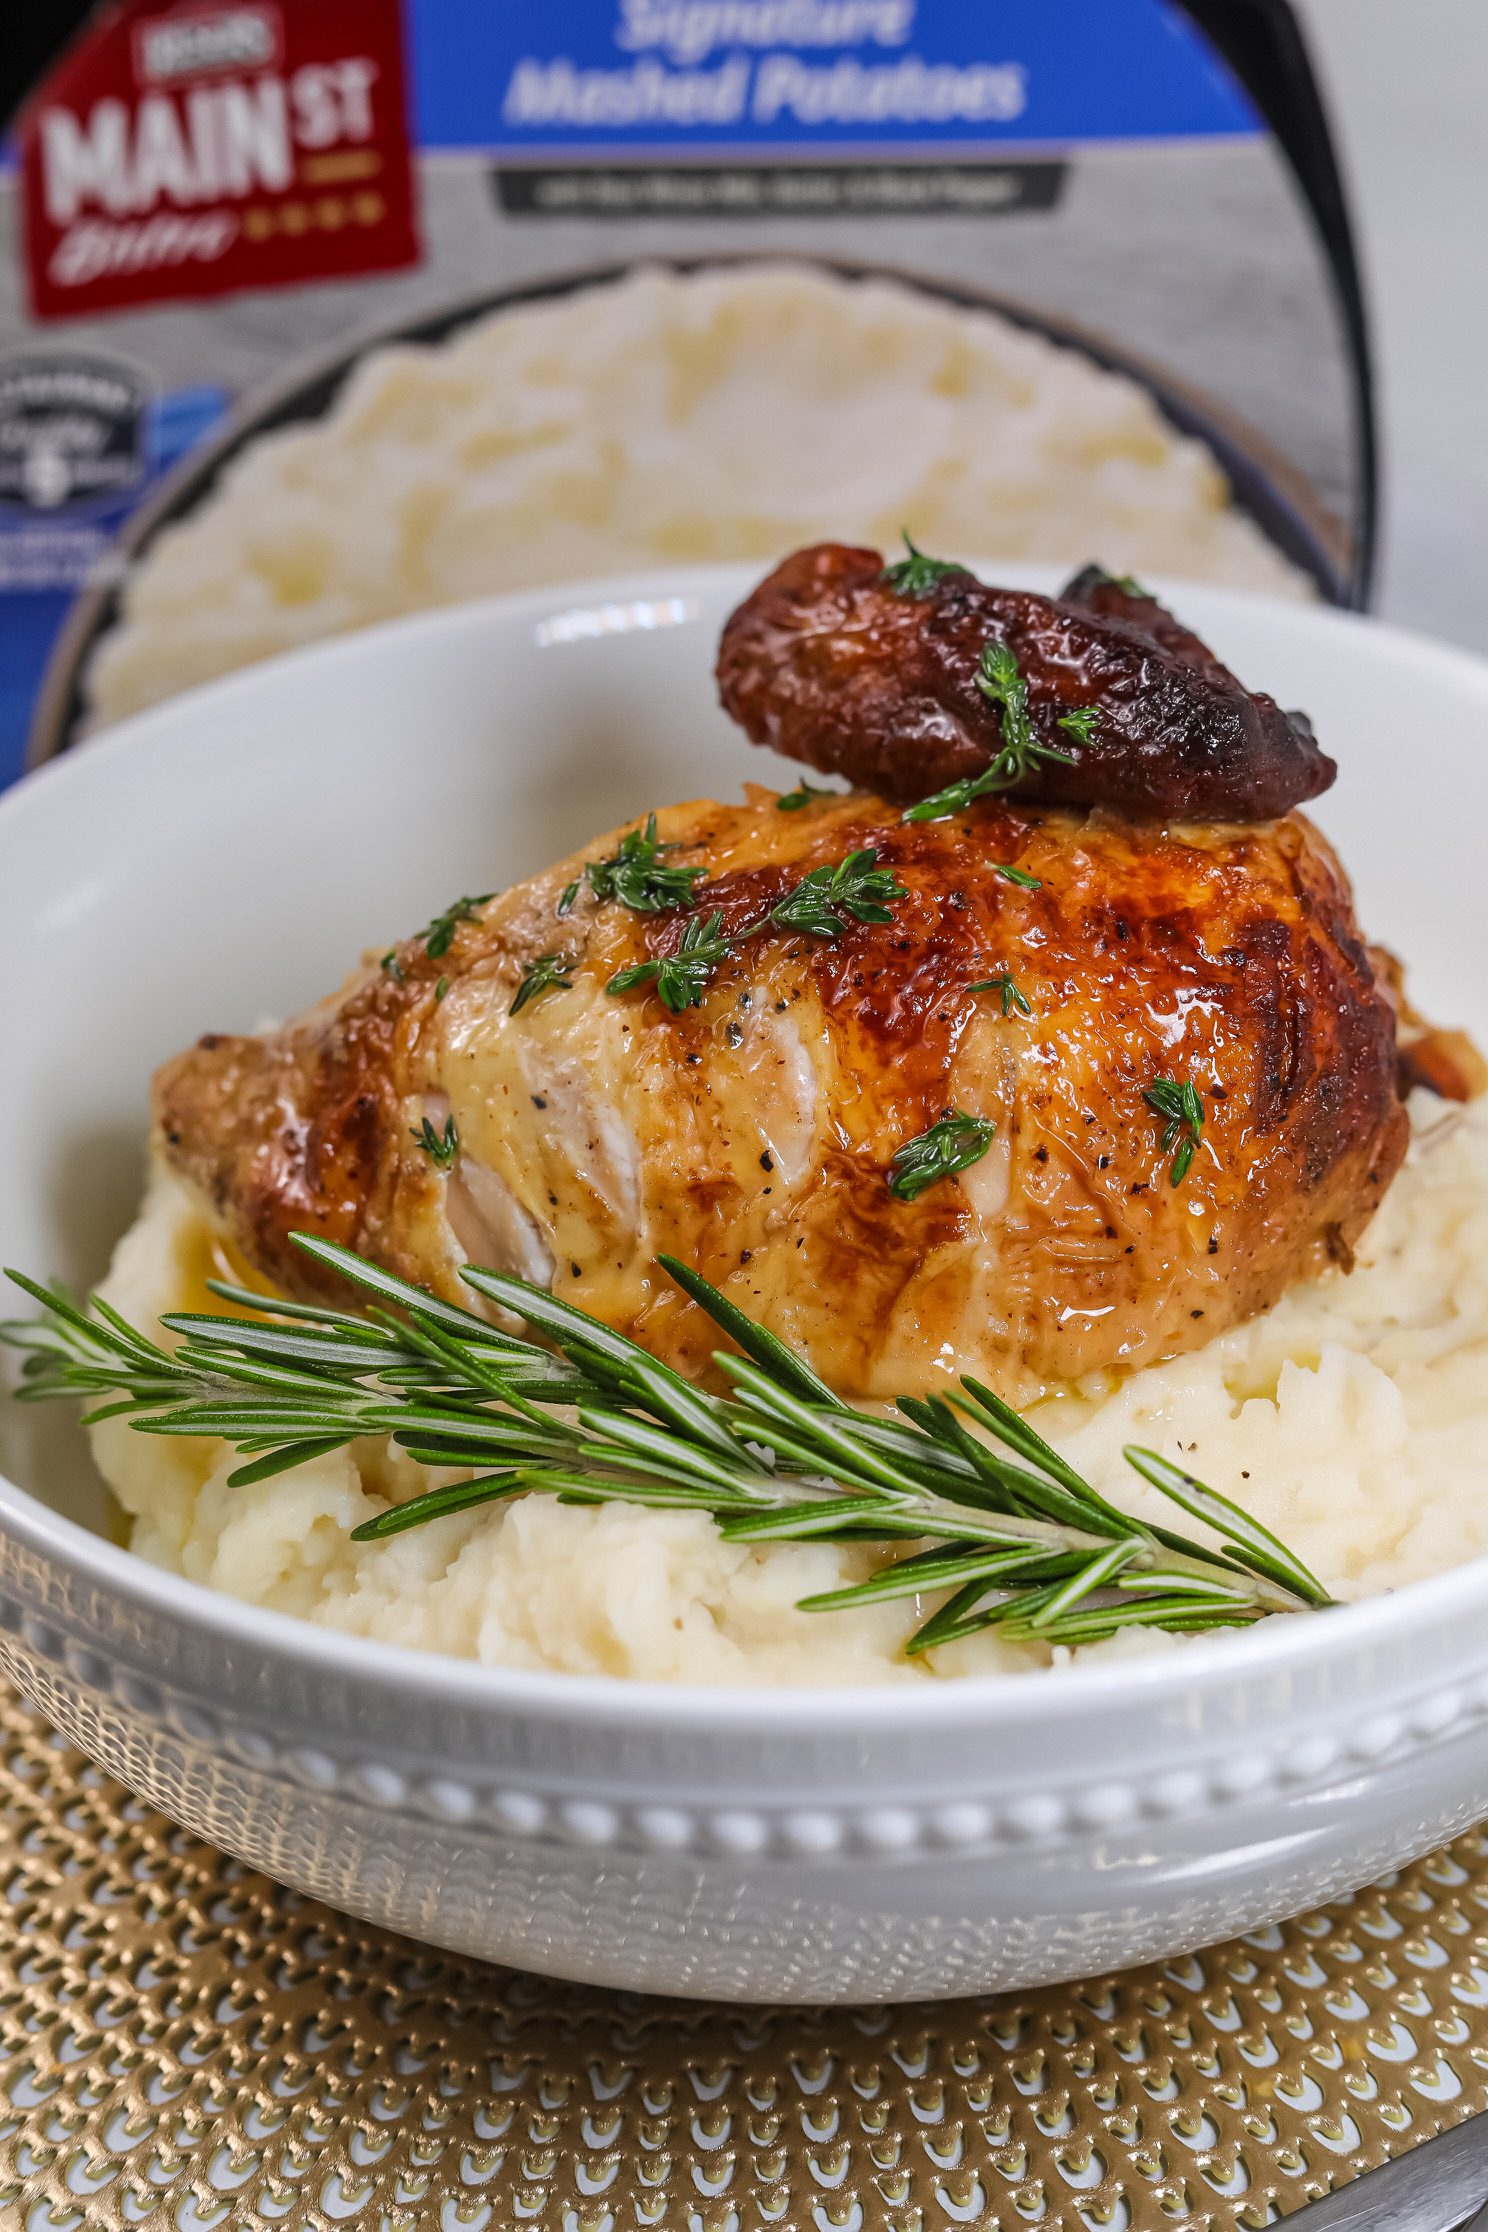 Roast chicken sitting in a bowl on top of Main St Bistro Signature Mashed Potatoes with rosemary sprig.